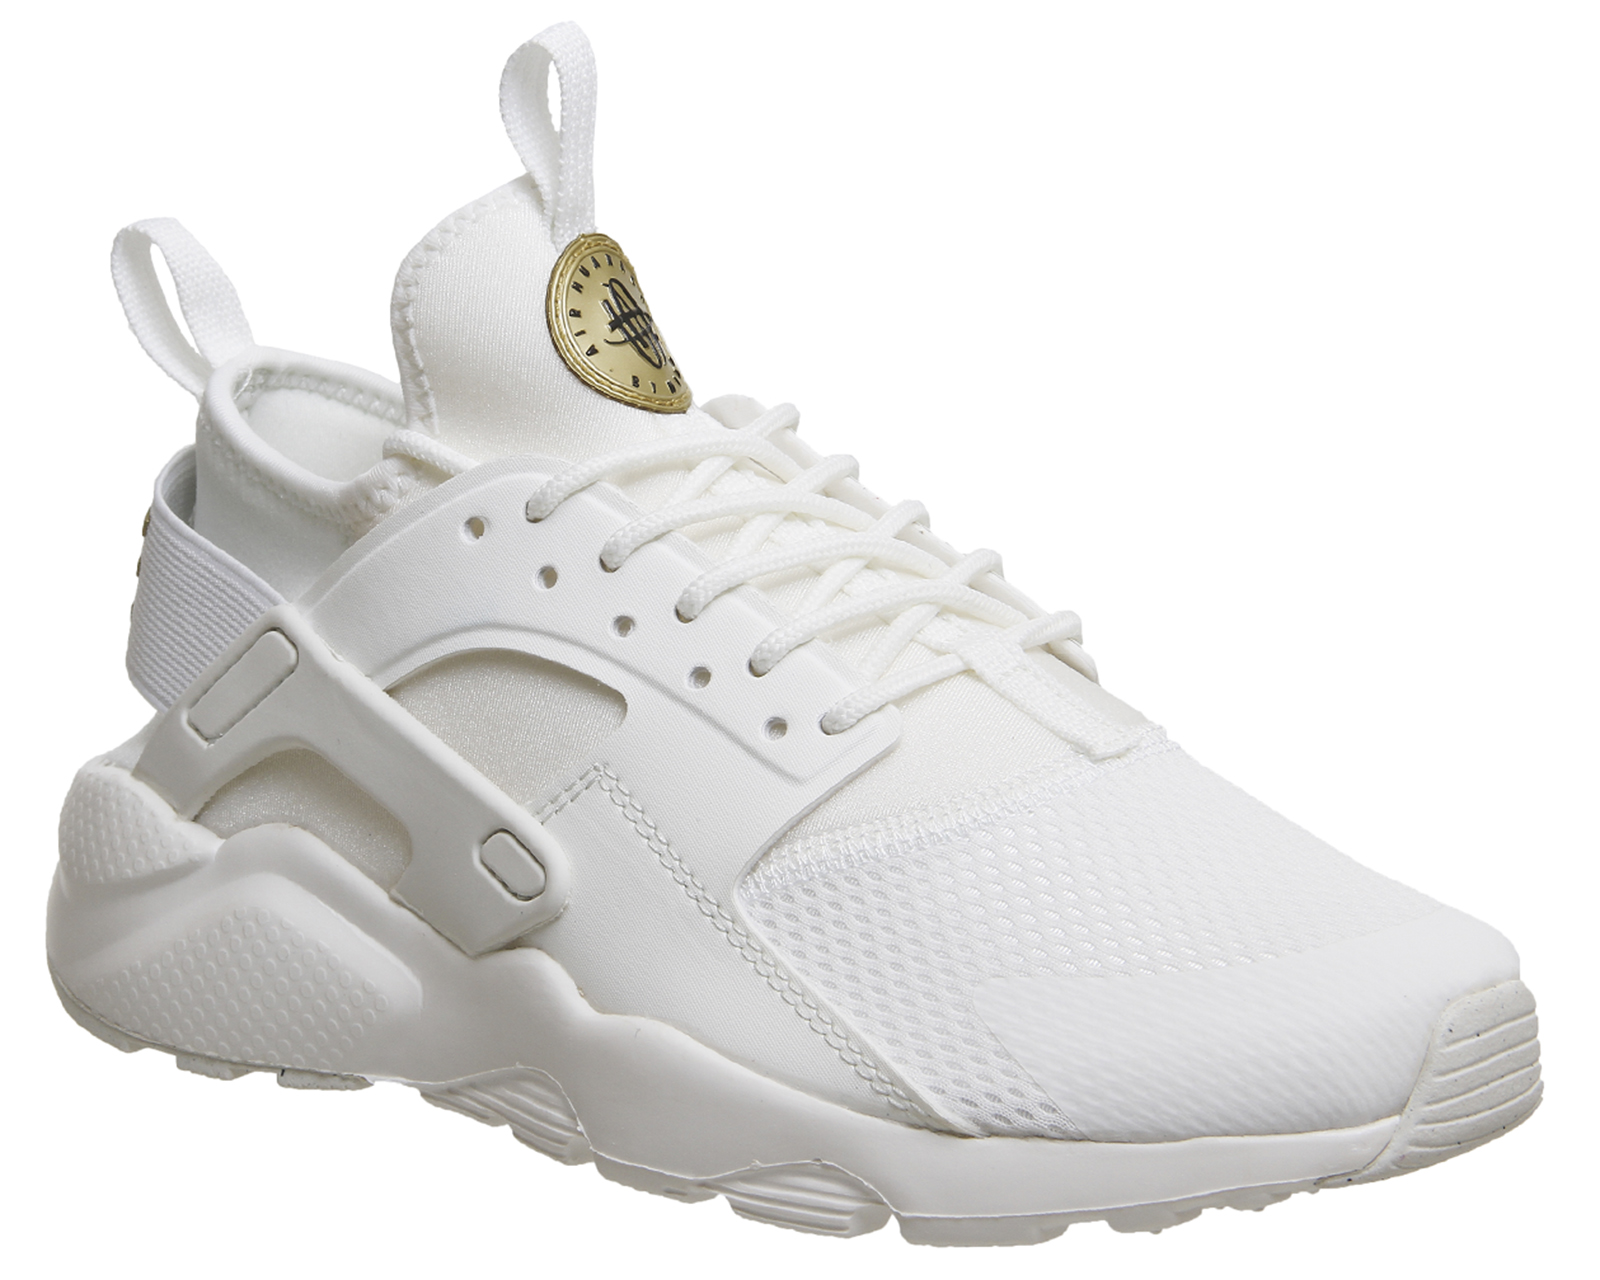 Huaraches Junior Size 5 Top Sellers, SAVE 55% - aveclumiere.com